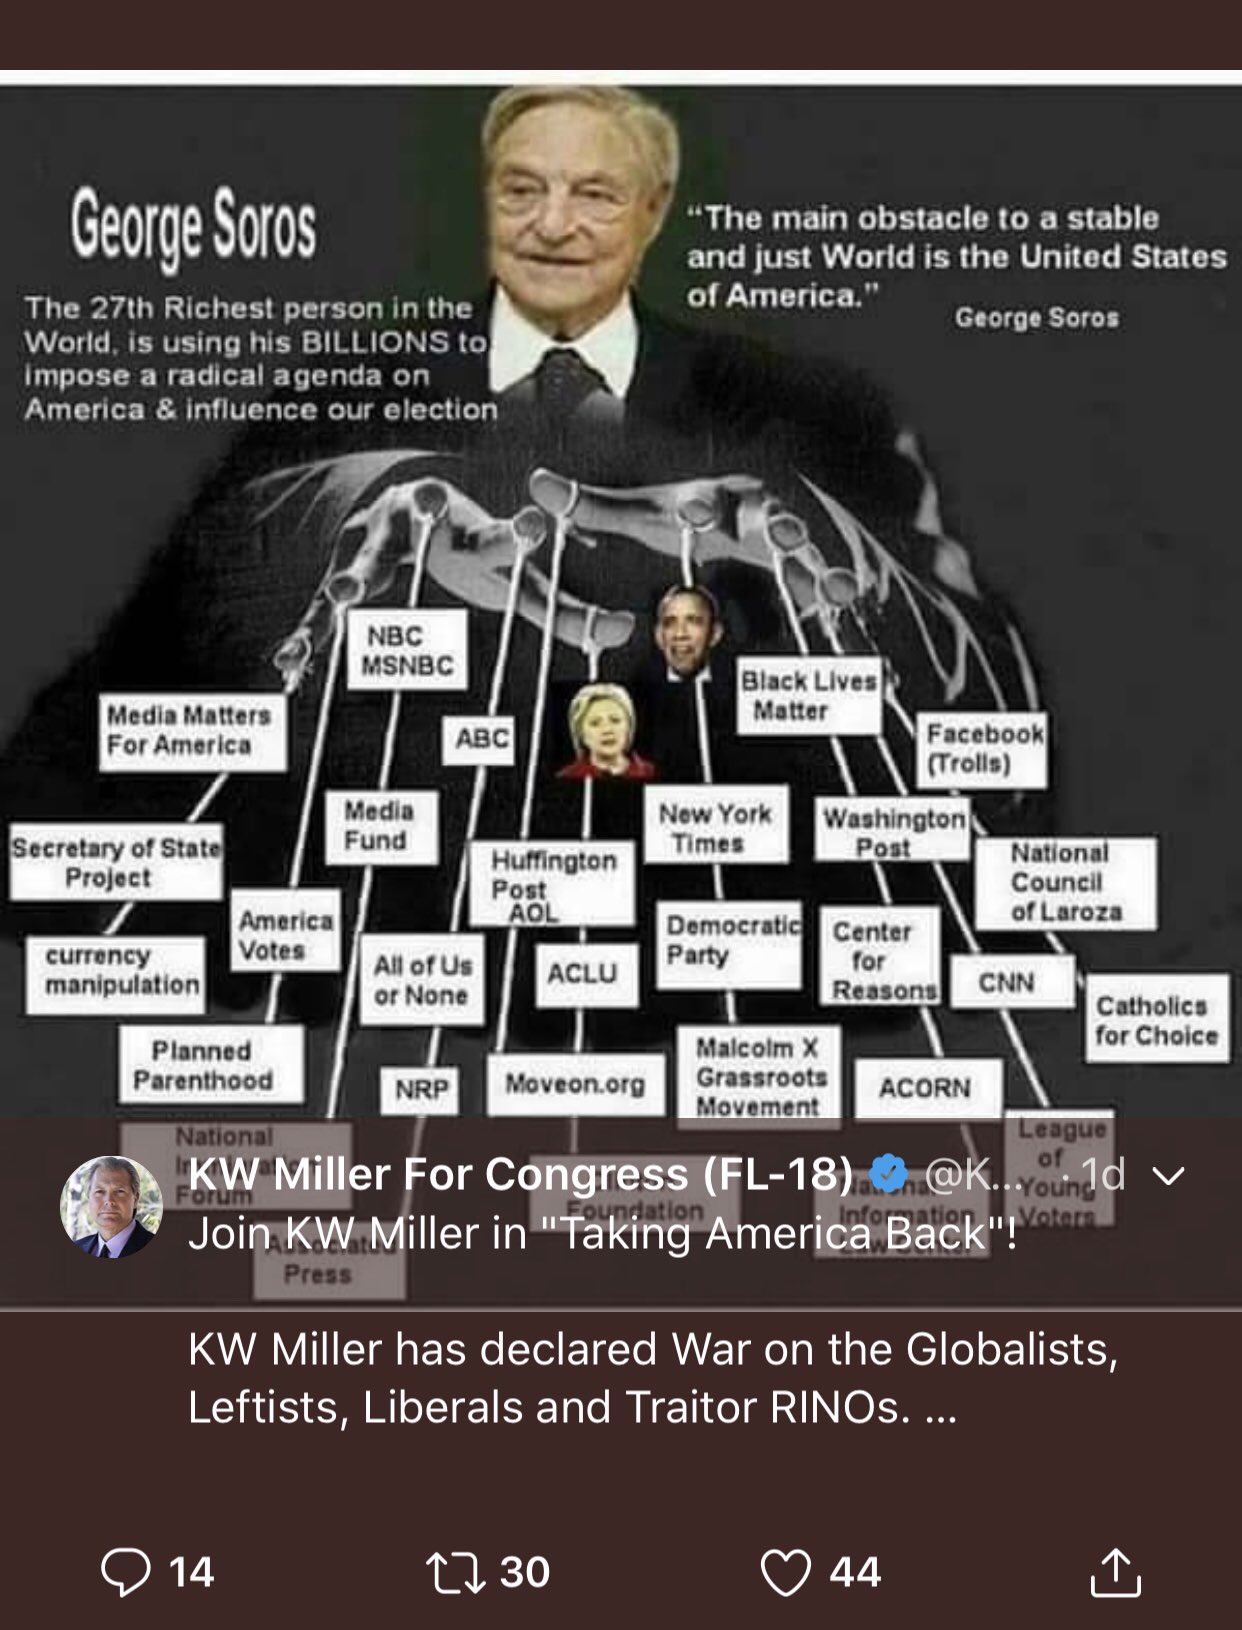 Ari Kohen al Twitter: "George Soros comes up a *lot* in this guy's tweets.  Over the past 2 decades the right wing has made Soros responsible for just  about everything they hate.